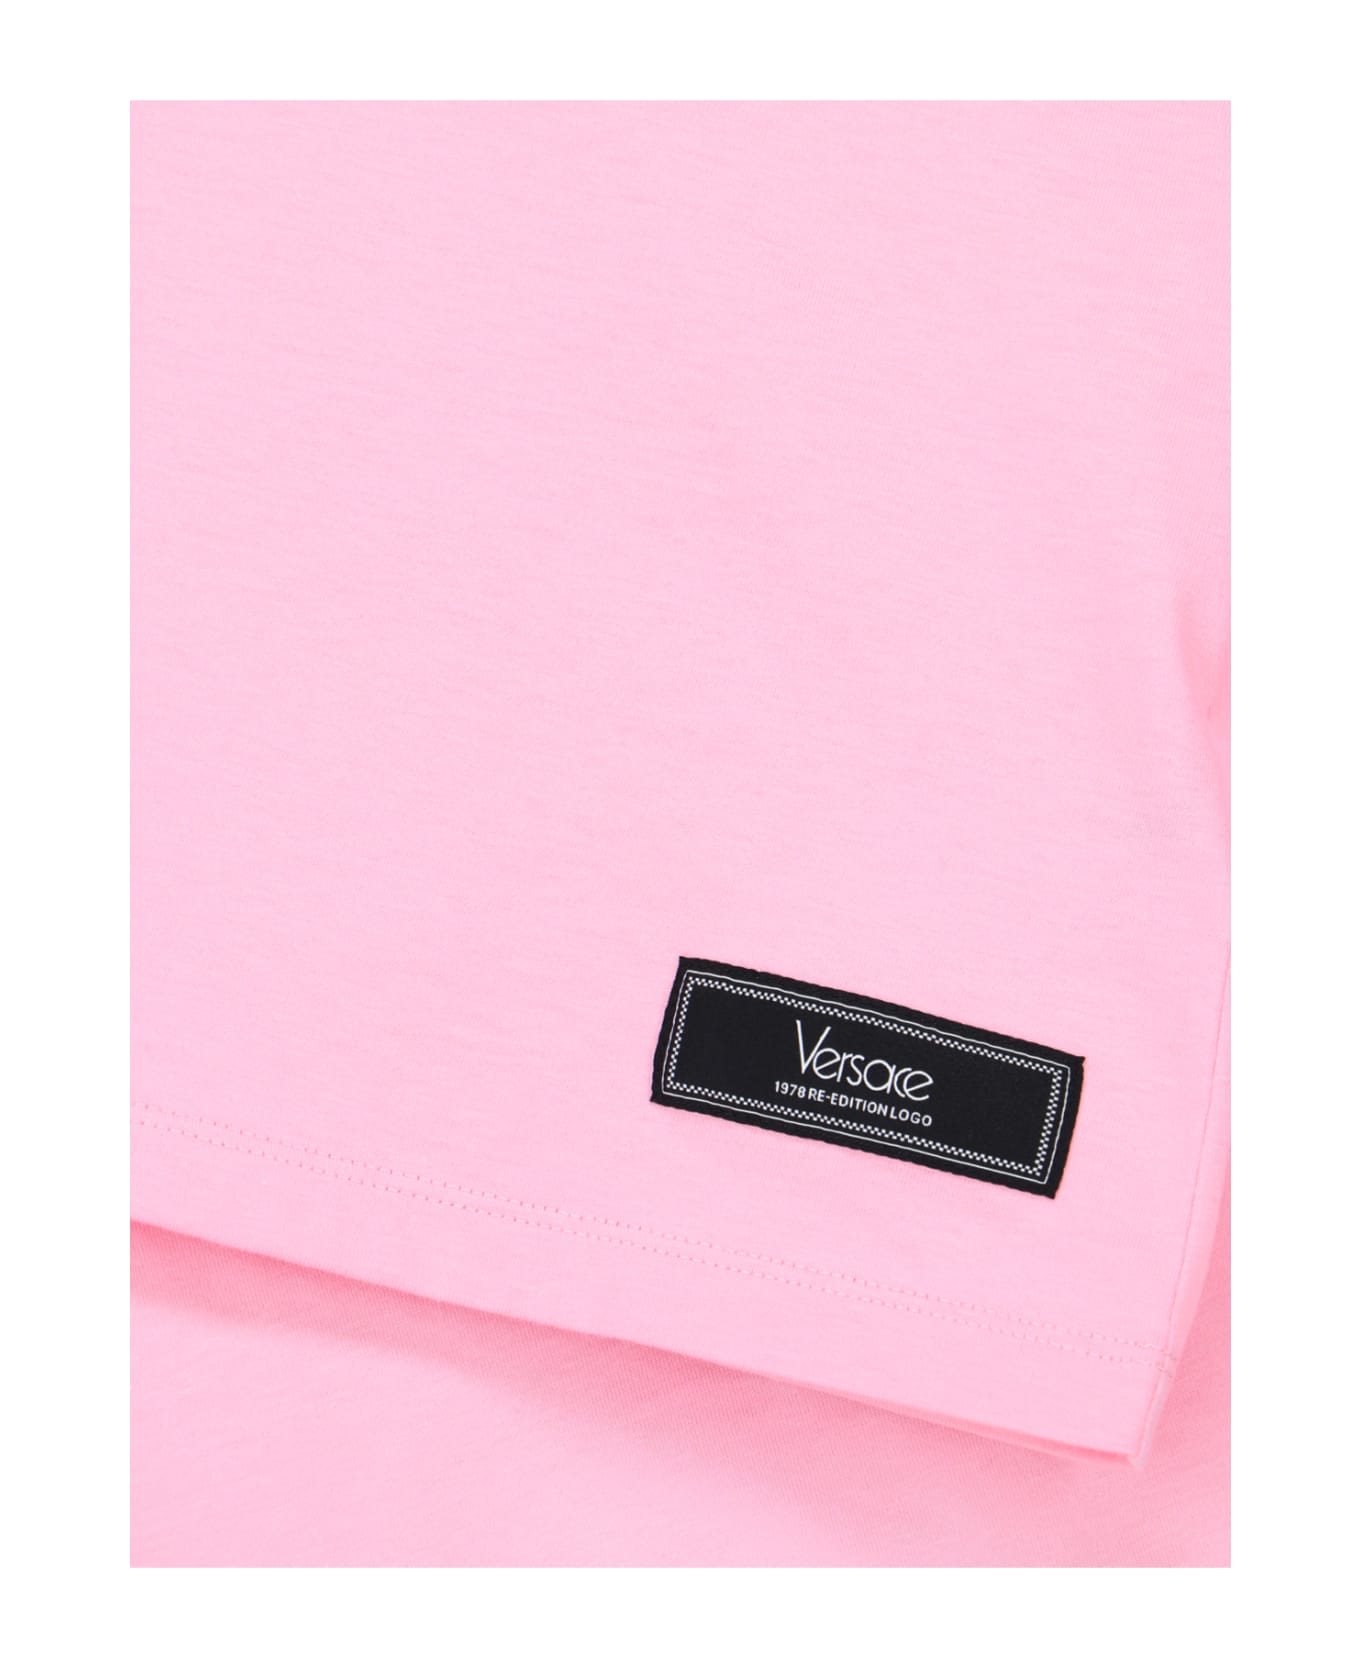 Versace "1978 Re-edition" Logo T-shirt - Pink Tシャツ